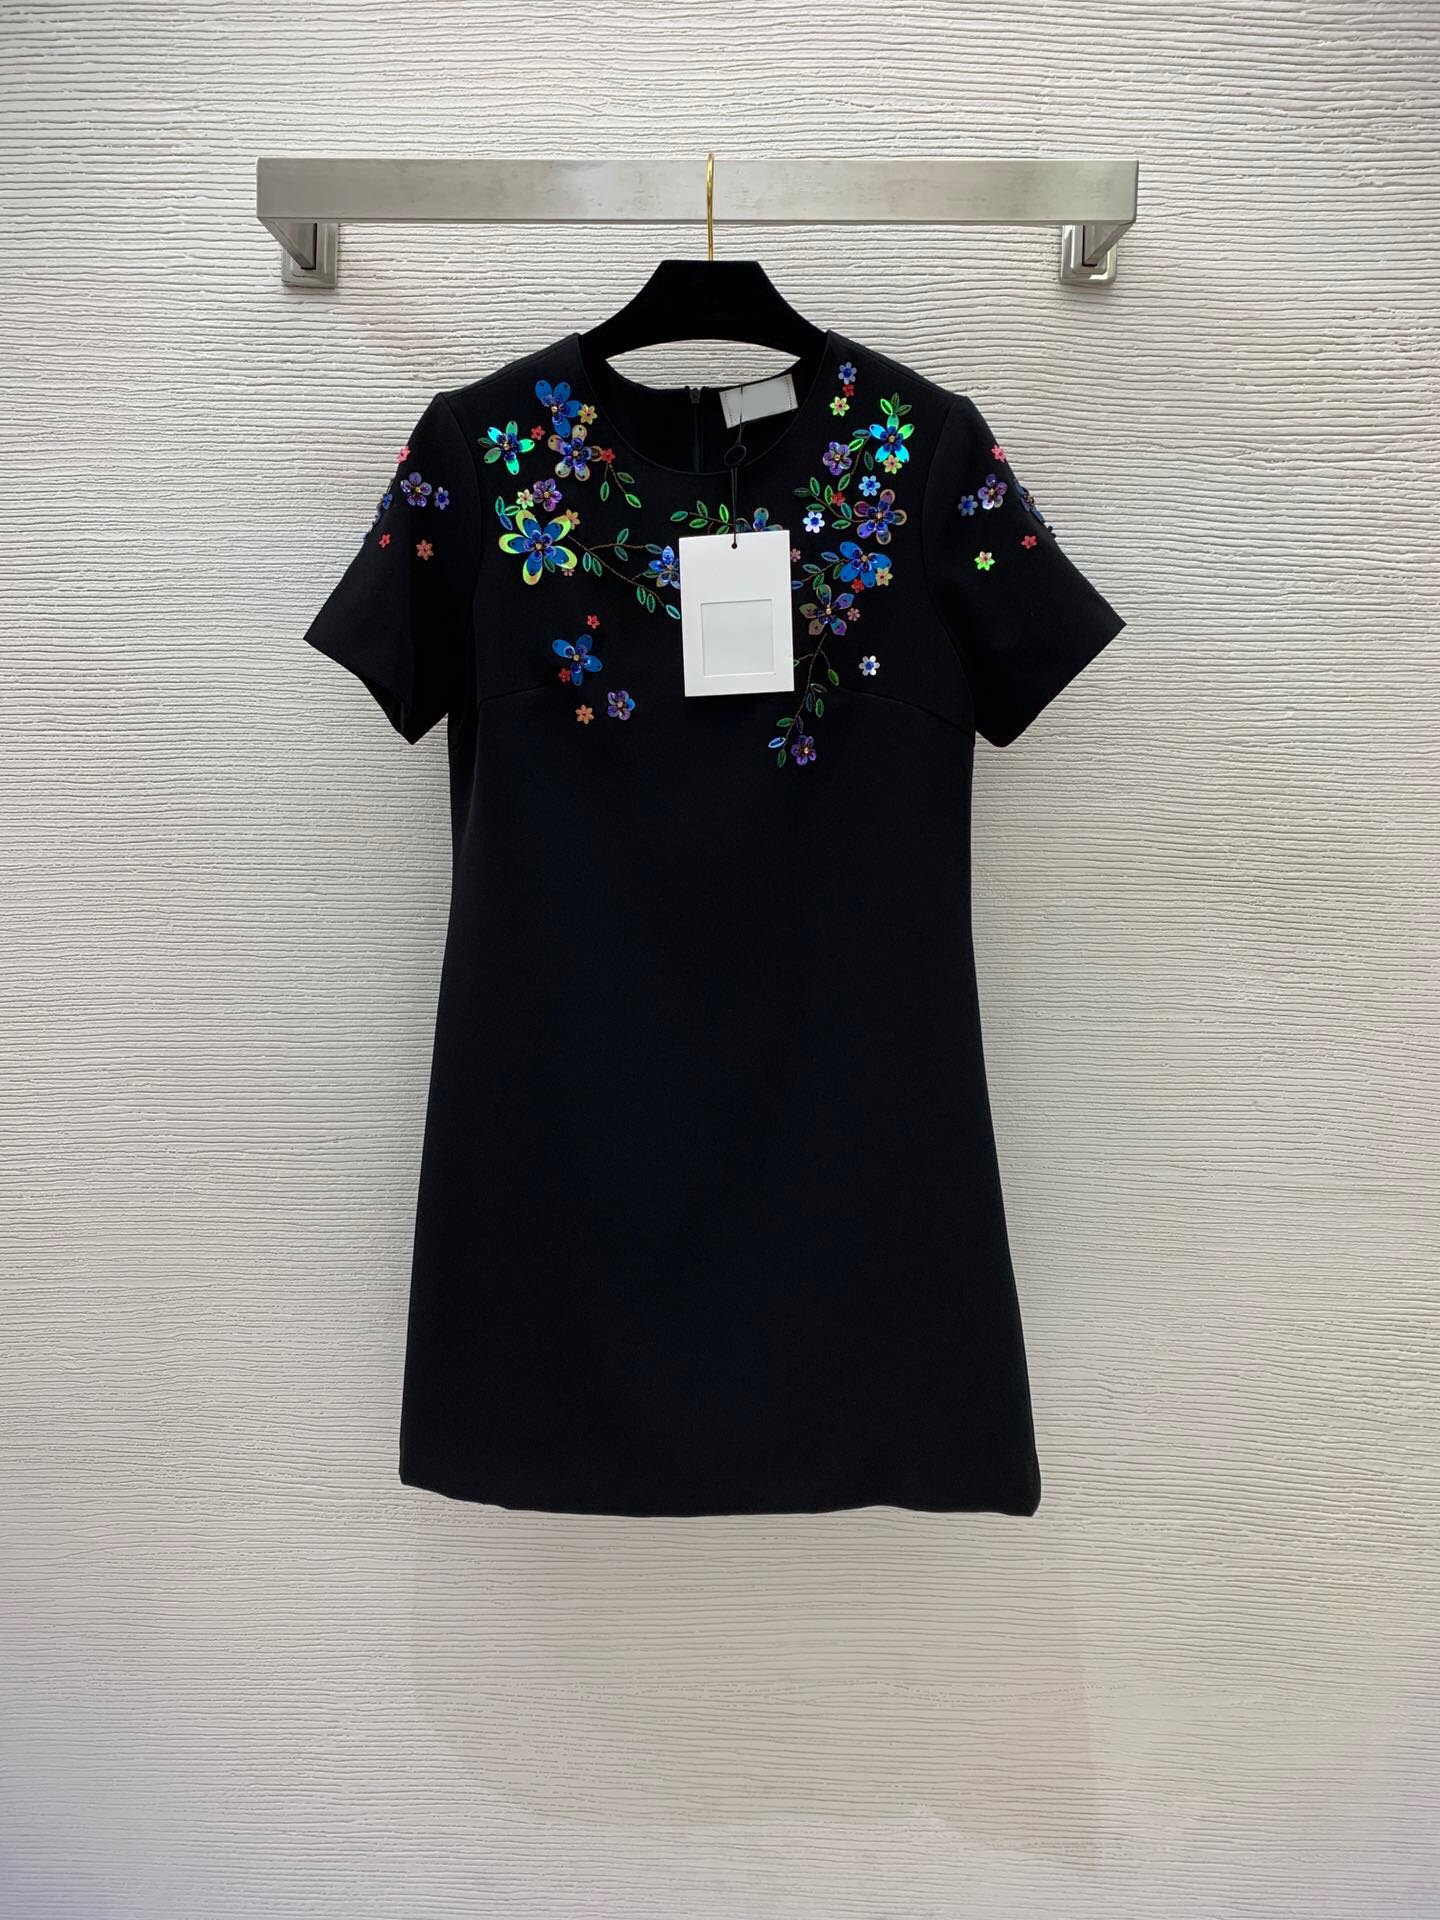 

226 2022 Milan Runway Dress Spring Summer Dress Crew Neck Sequin Black Apricot polyester Short Sleeve Brand Same Style Empire Womens Dress Fashion High Quality weini, Customize